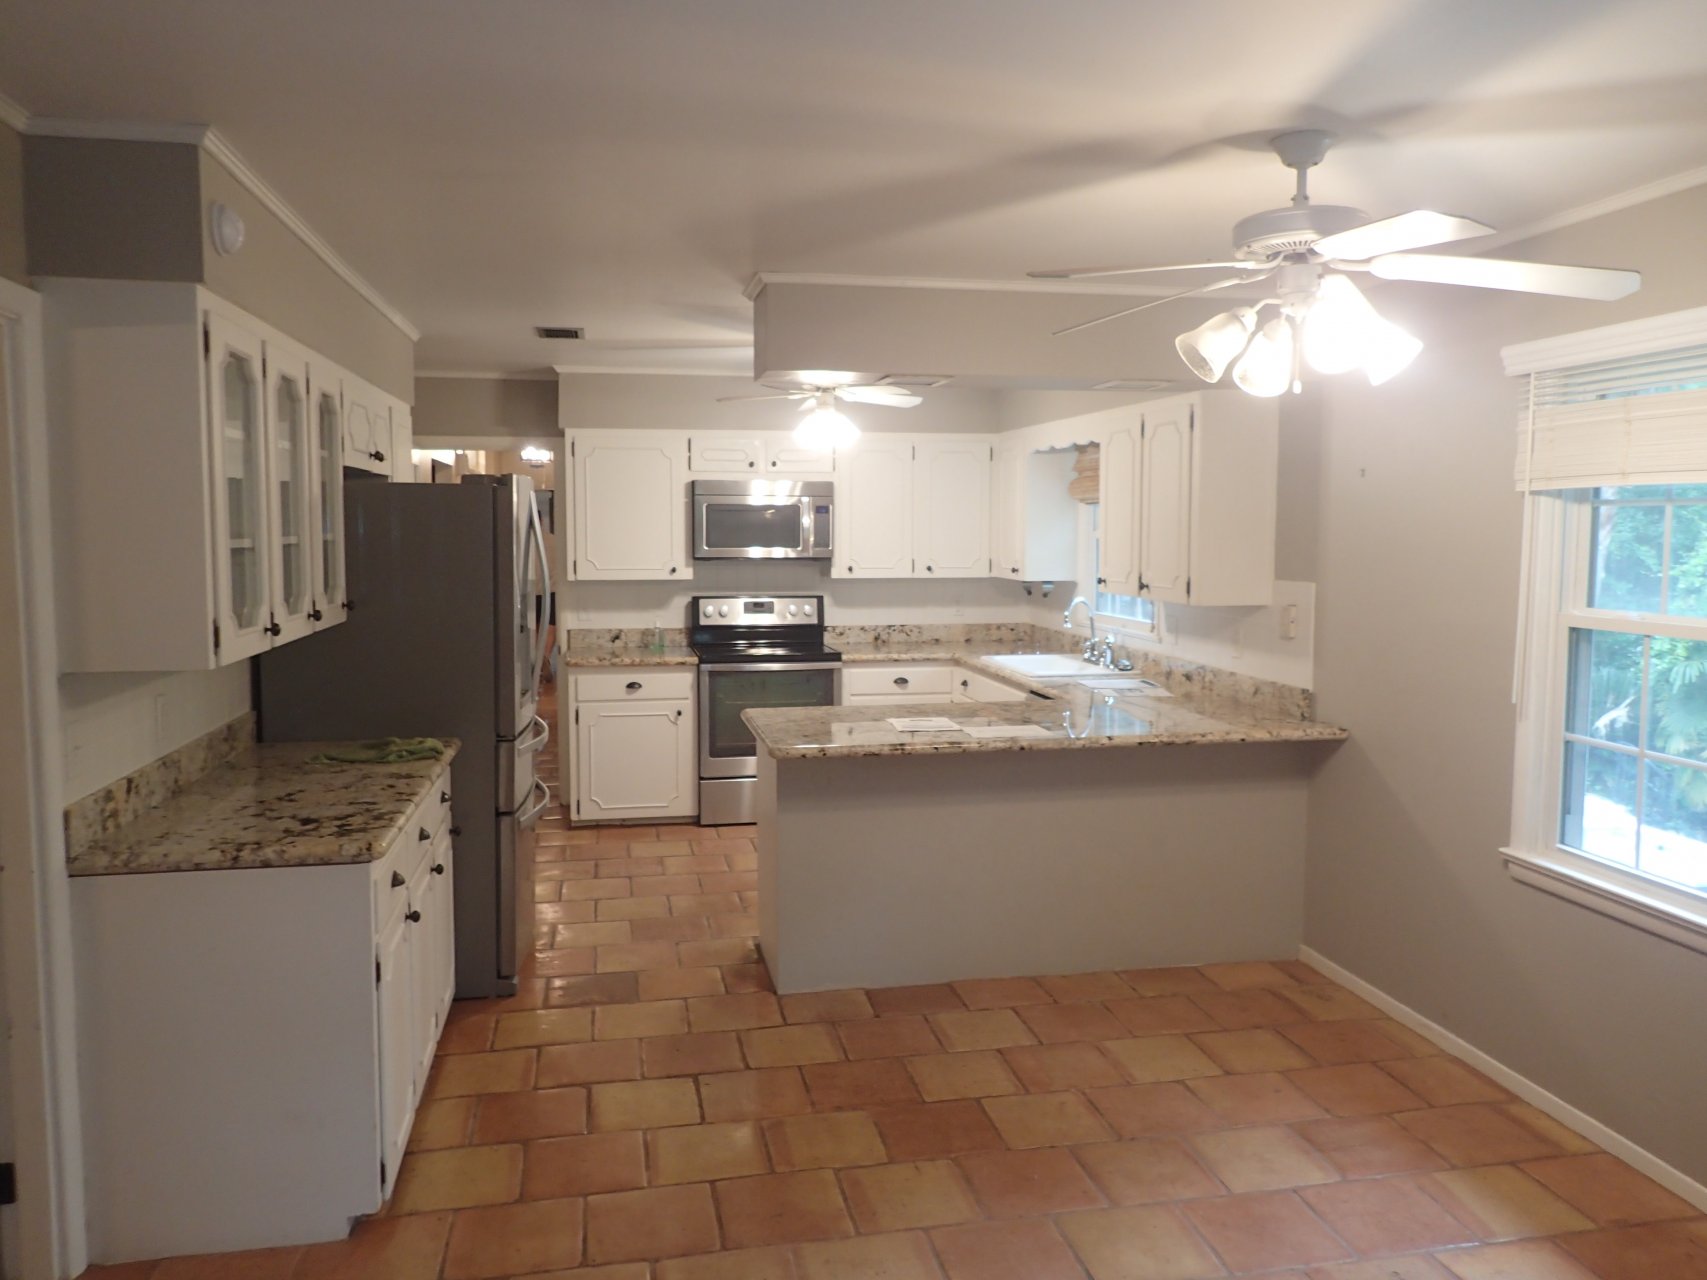 East Hill kitchen before remodel by Cabinet Depot